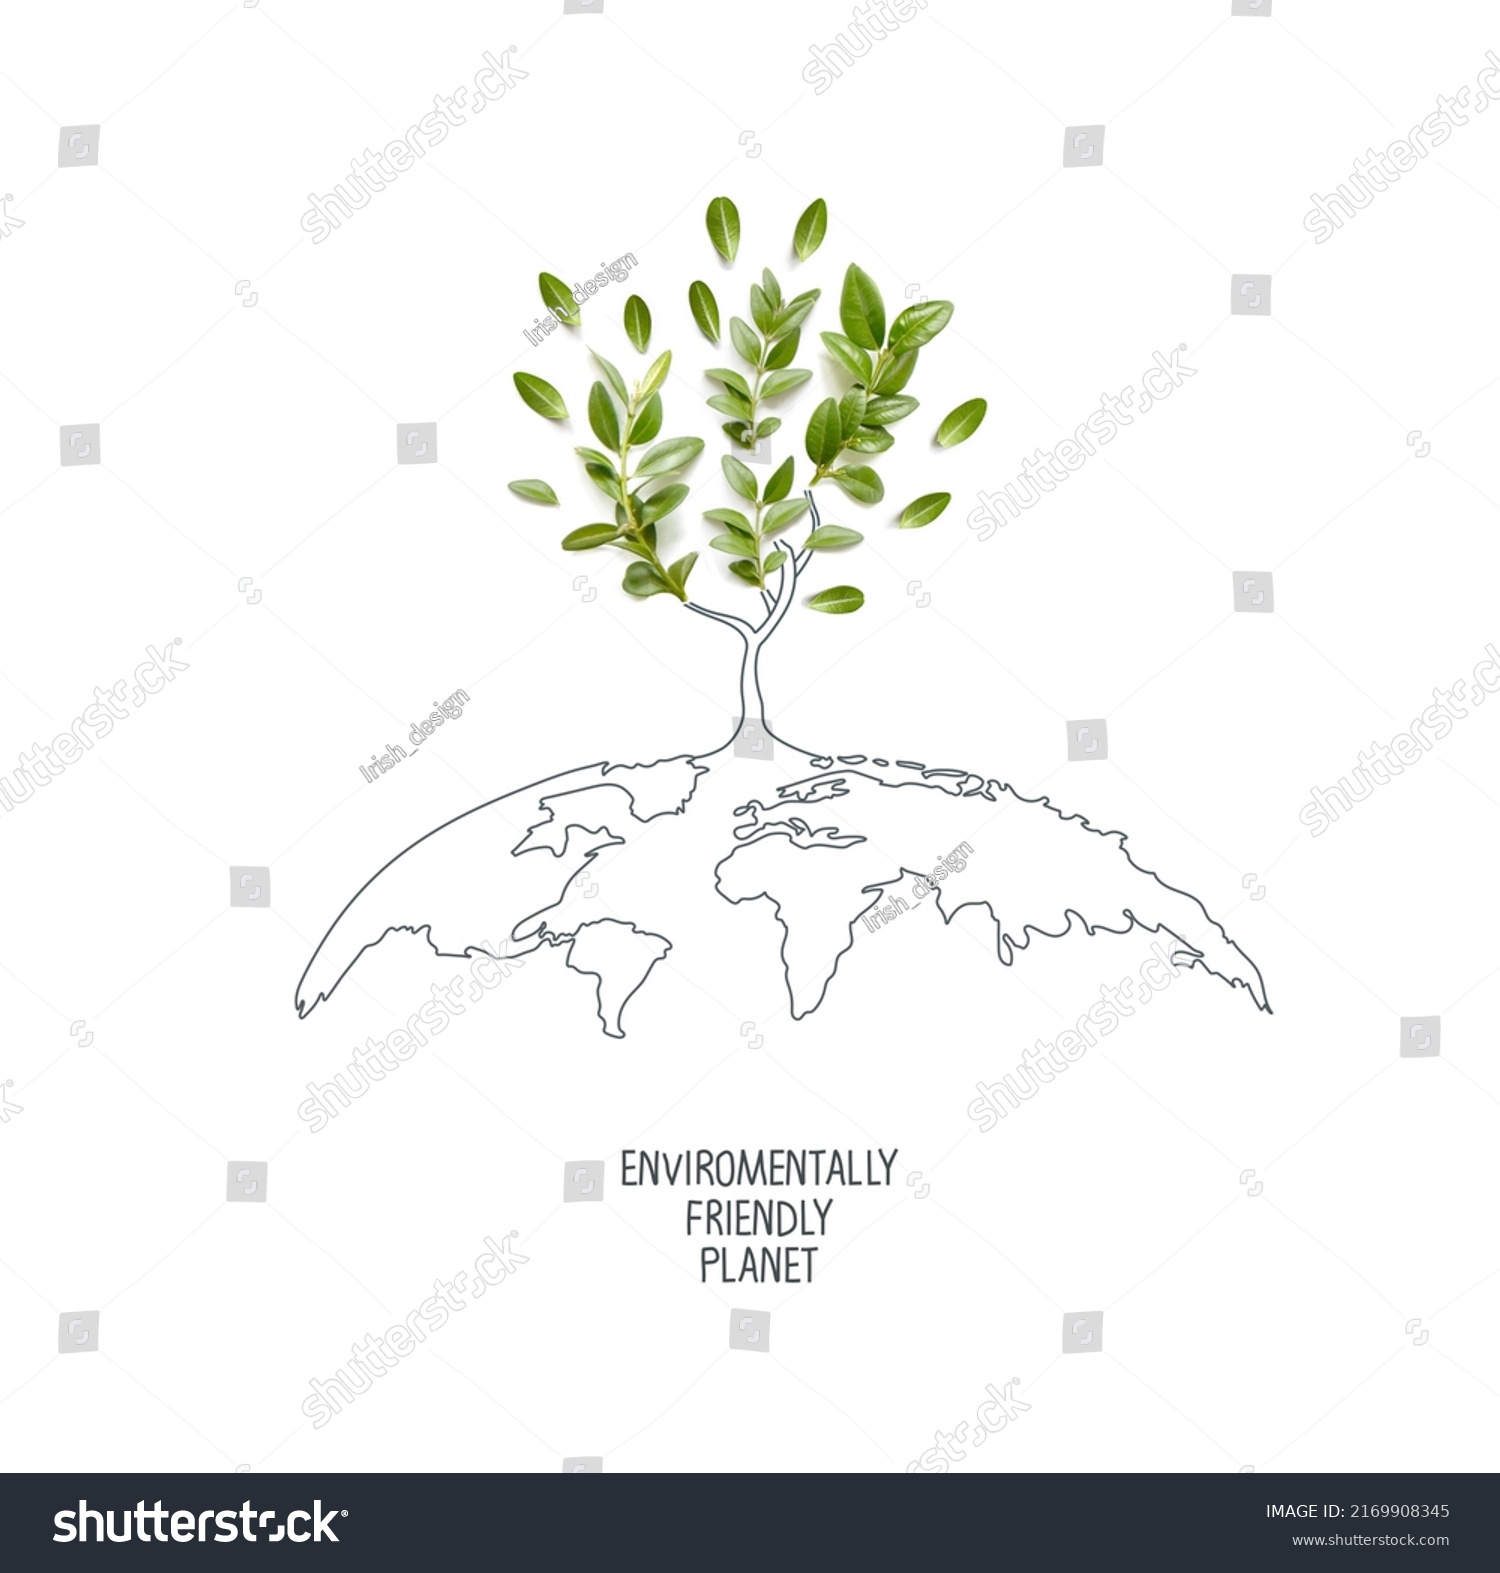 Environmentally friendly planet. Symbolic tree made from green leaves and branches with sketches map of the world. Minimal nature concept. Think Green. Ecology Concept. Top view. Flat lay. #2169908345